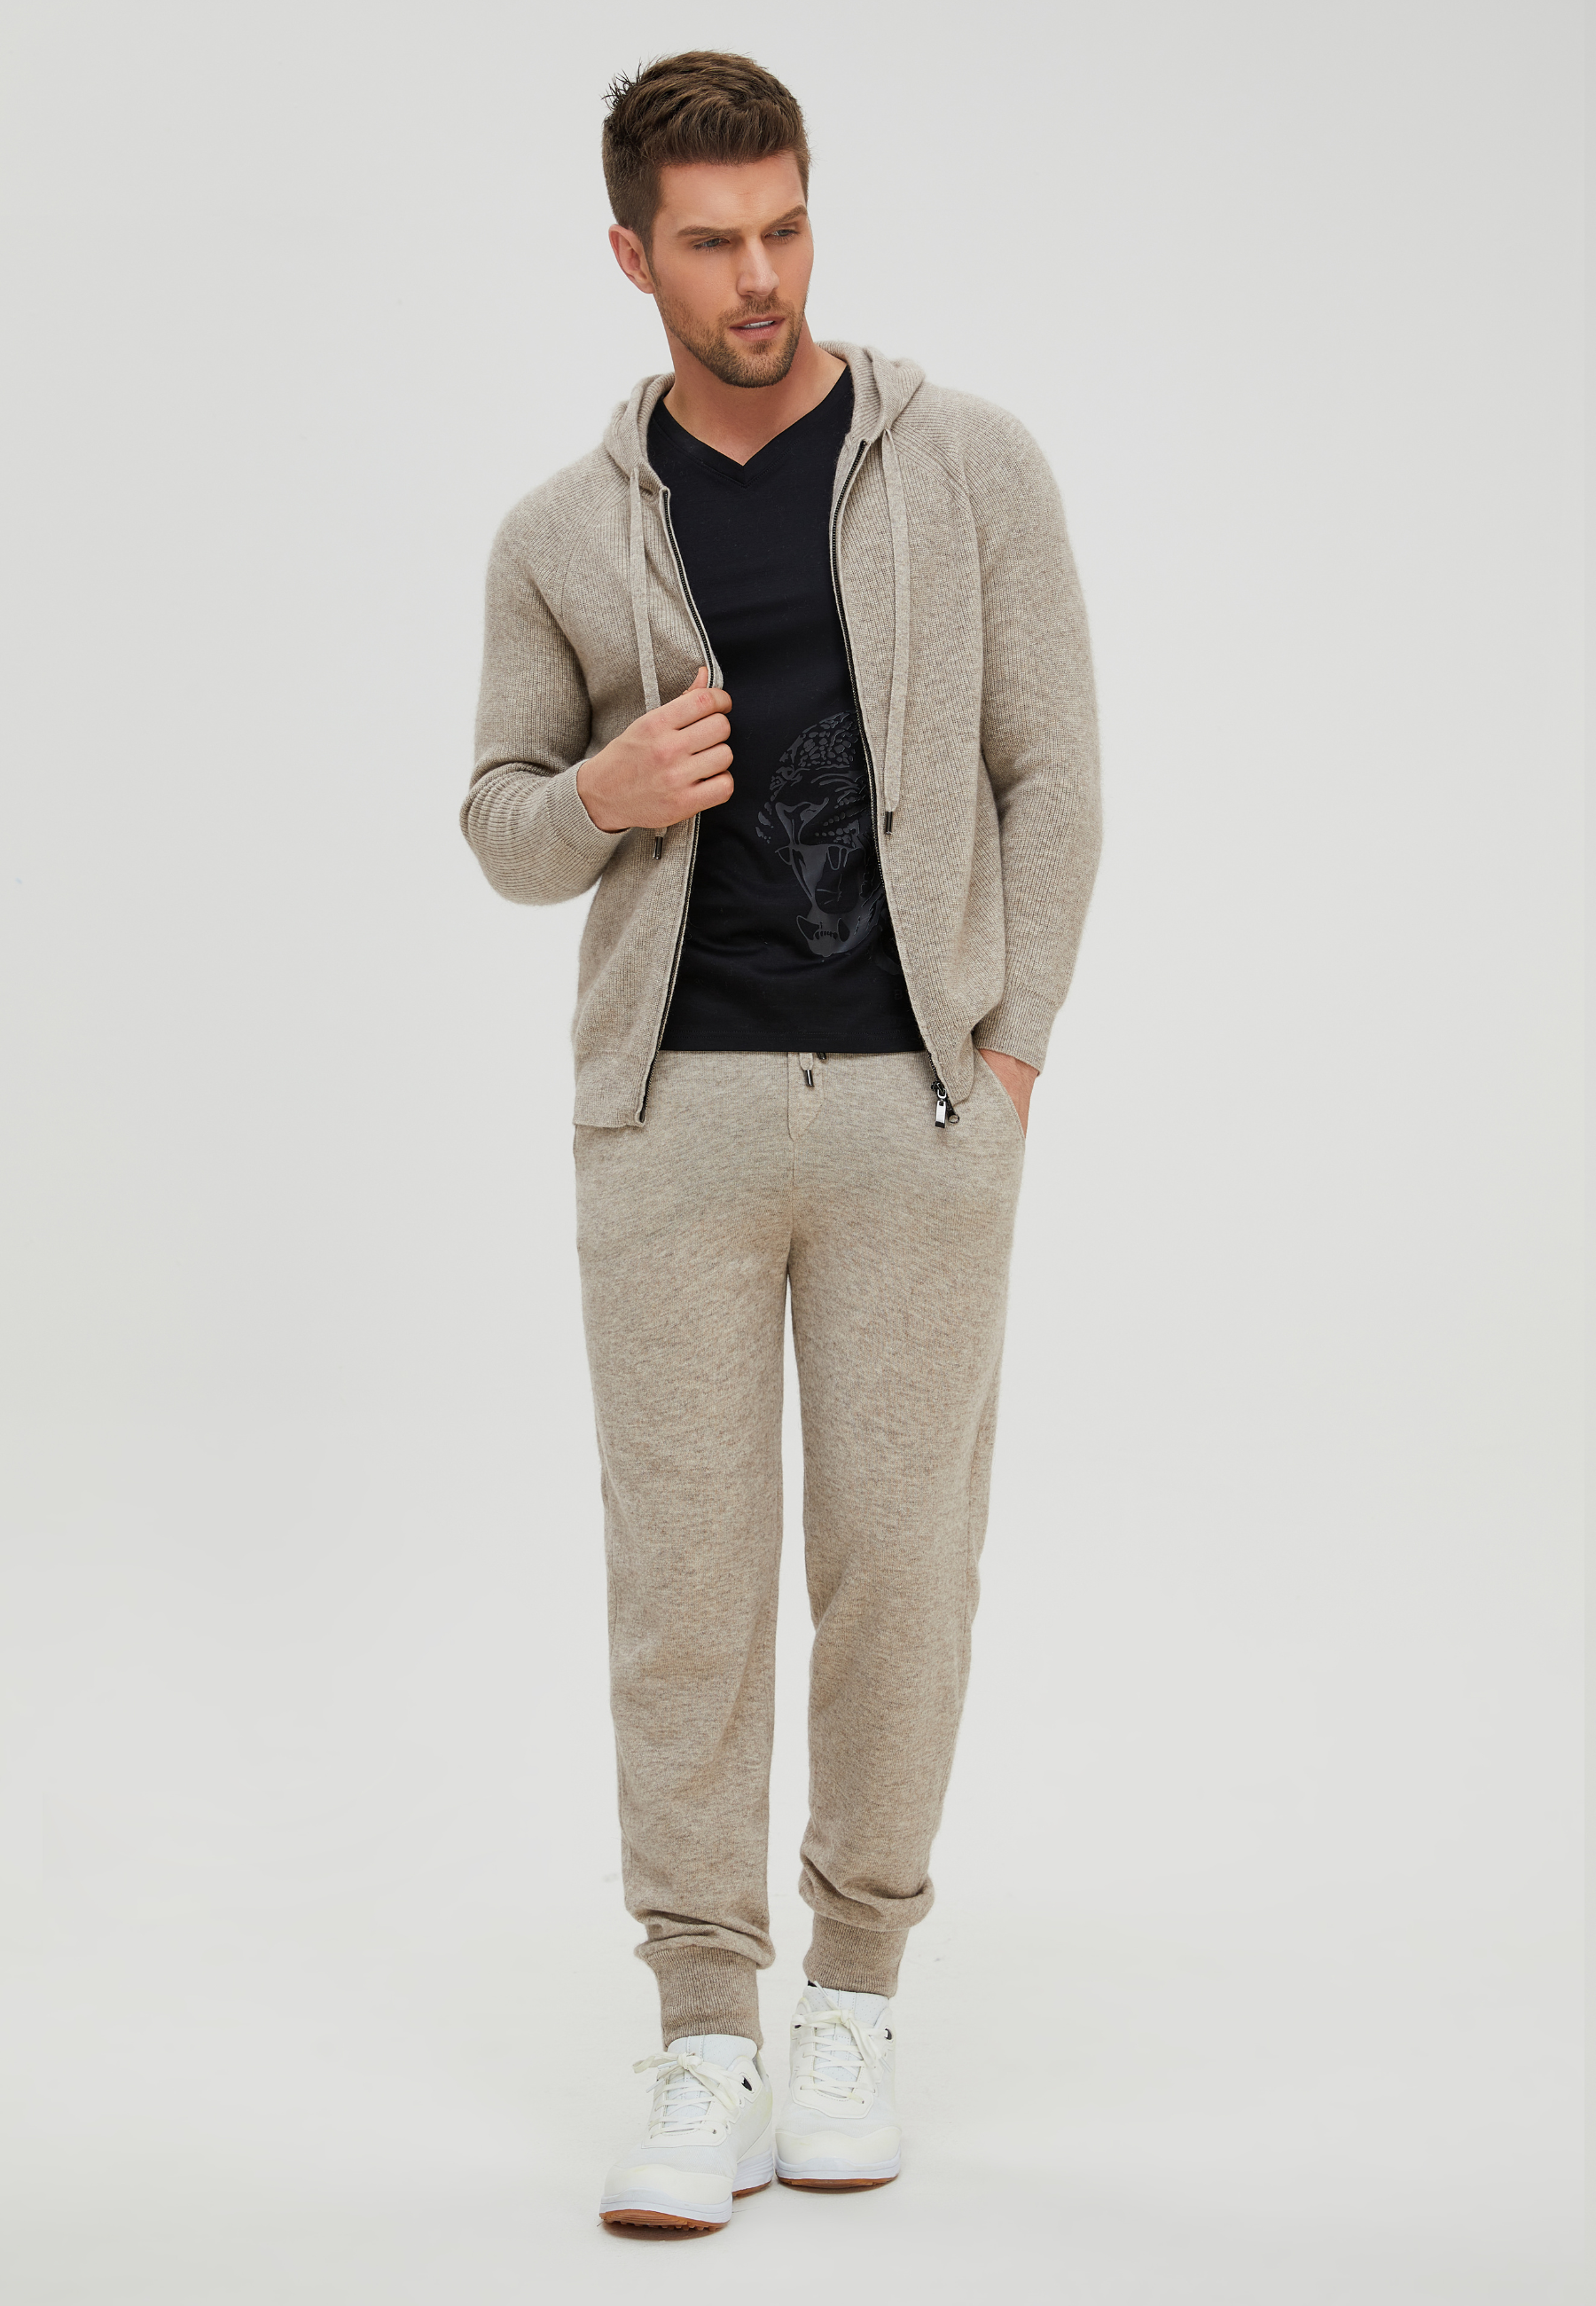 Ribbed Cashmere Jogger